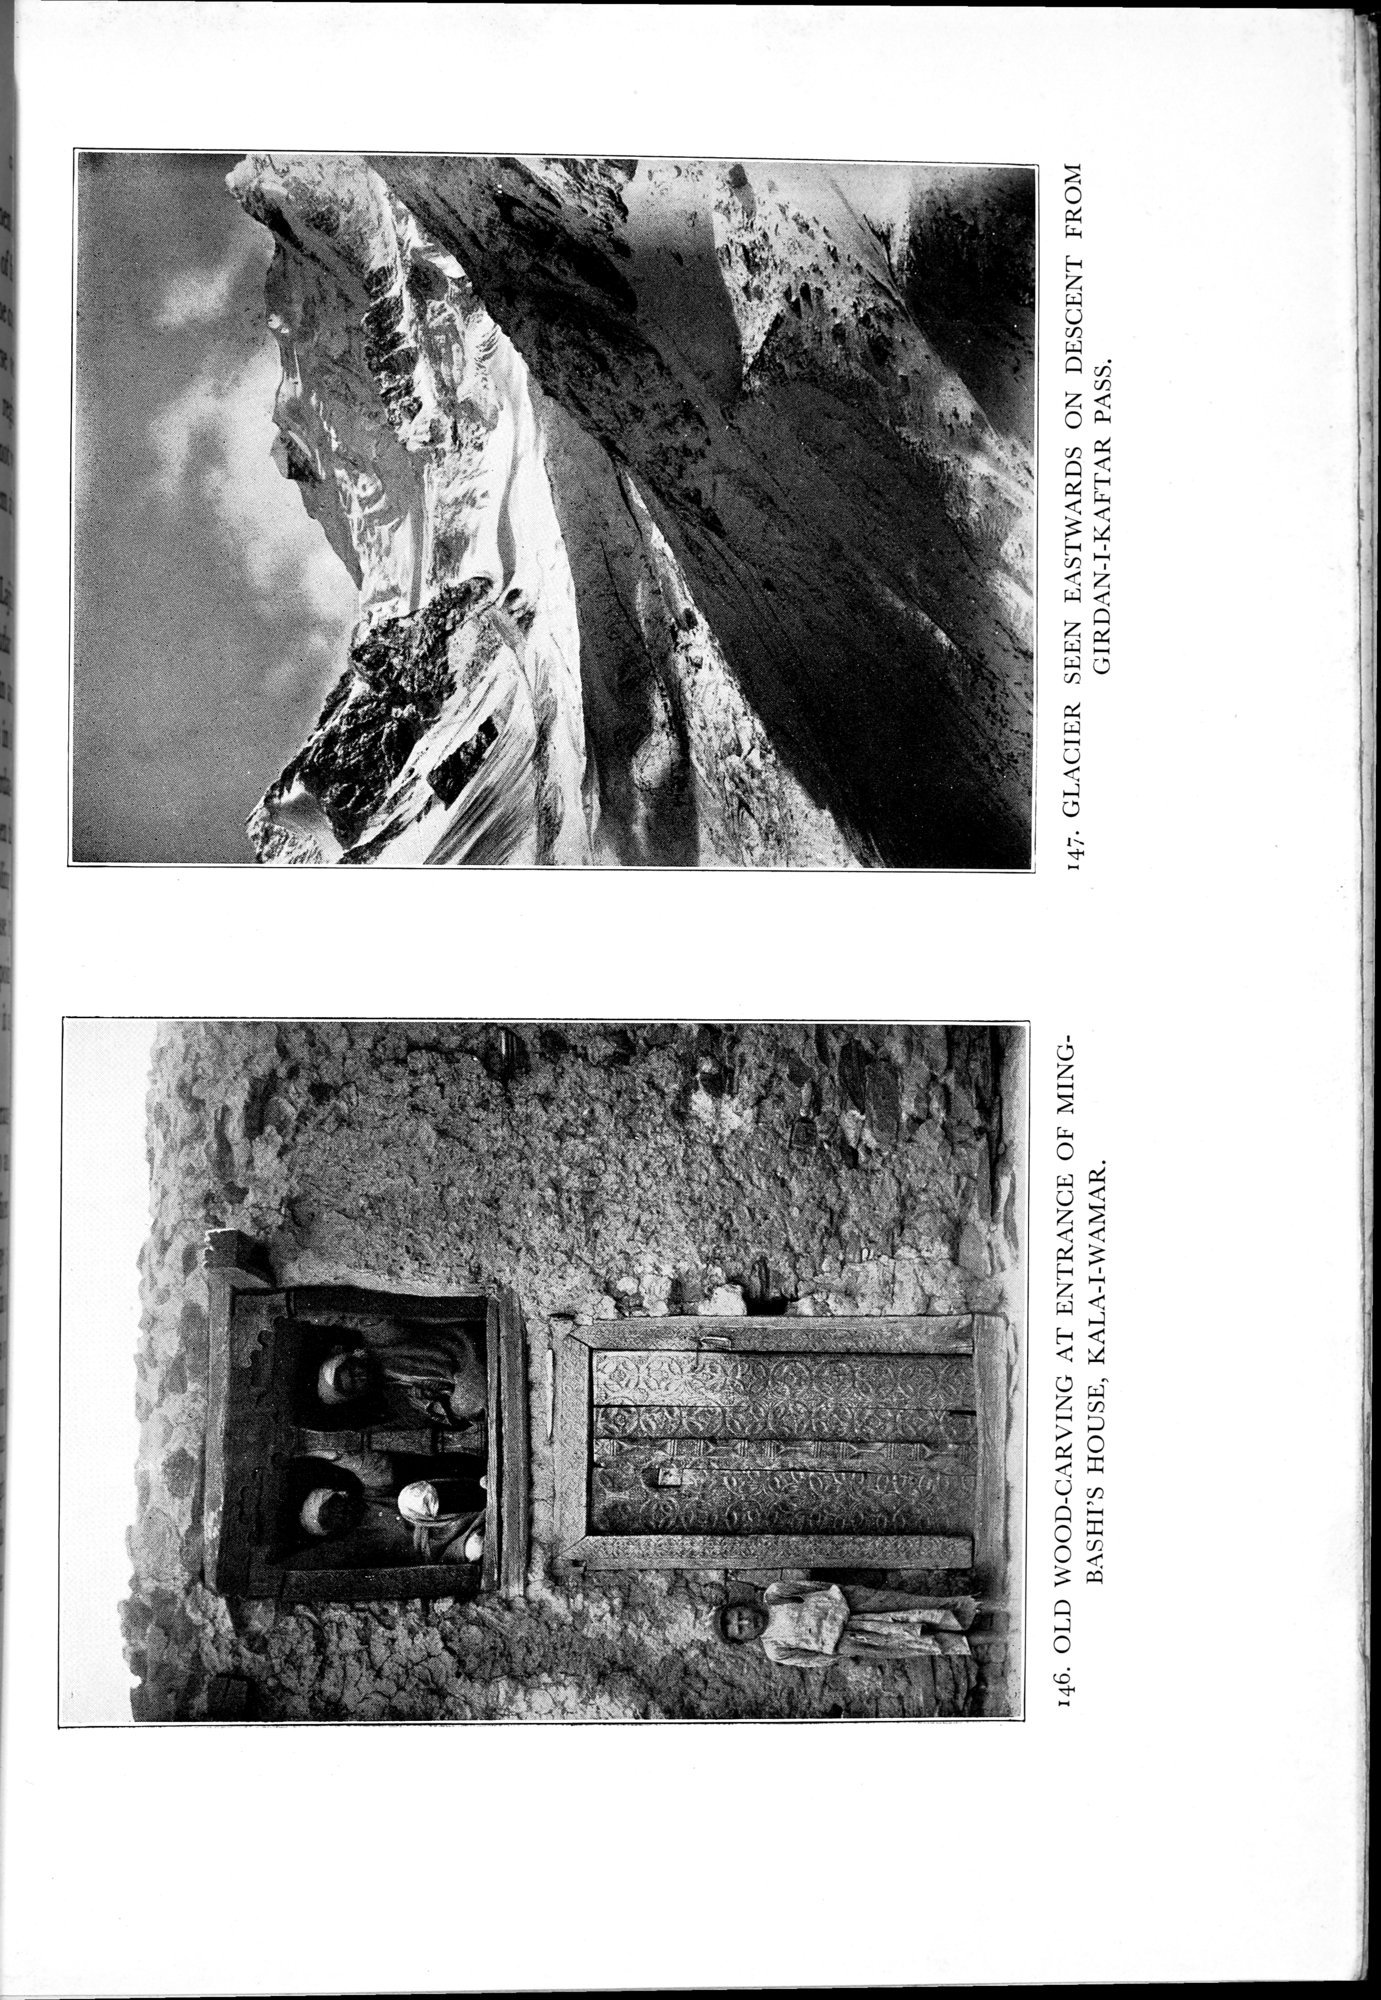 On Ancient Central-Asian Tracks : vol.1 / Page 553 (Grayscale High Resolution Image)